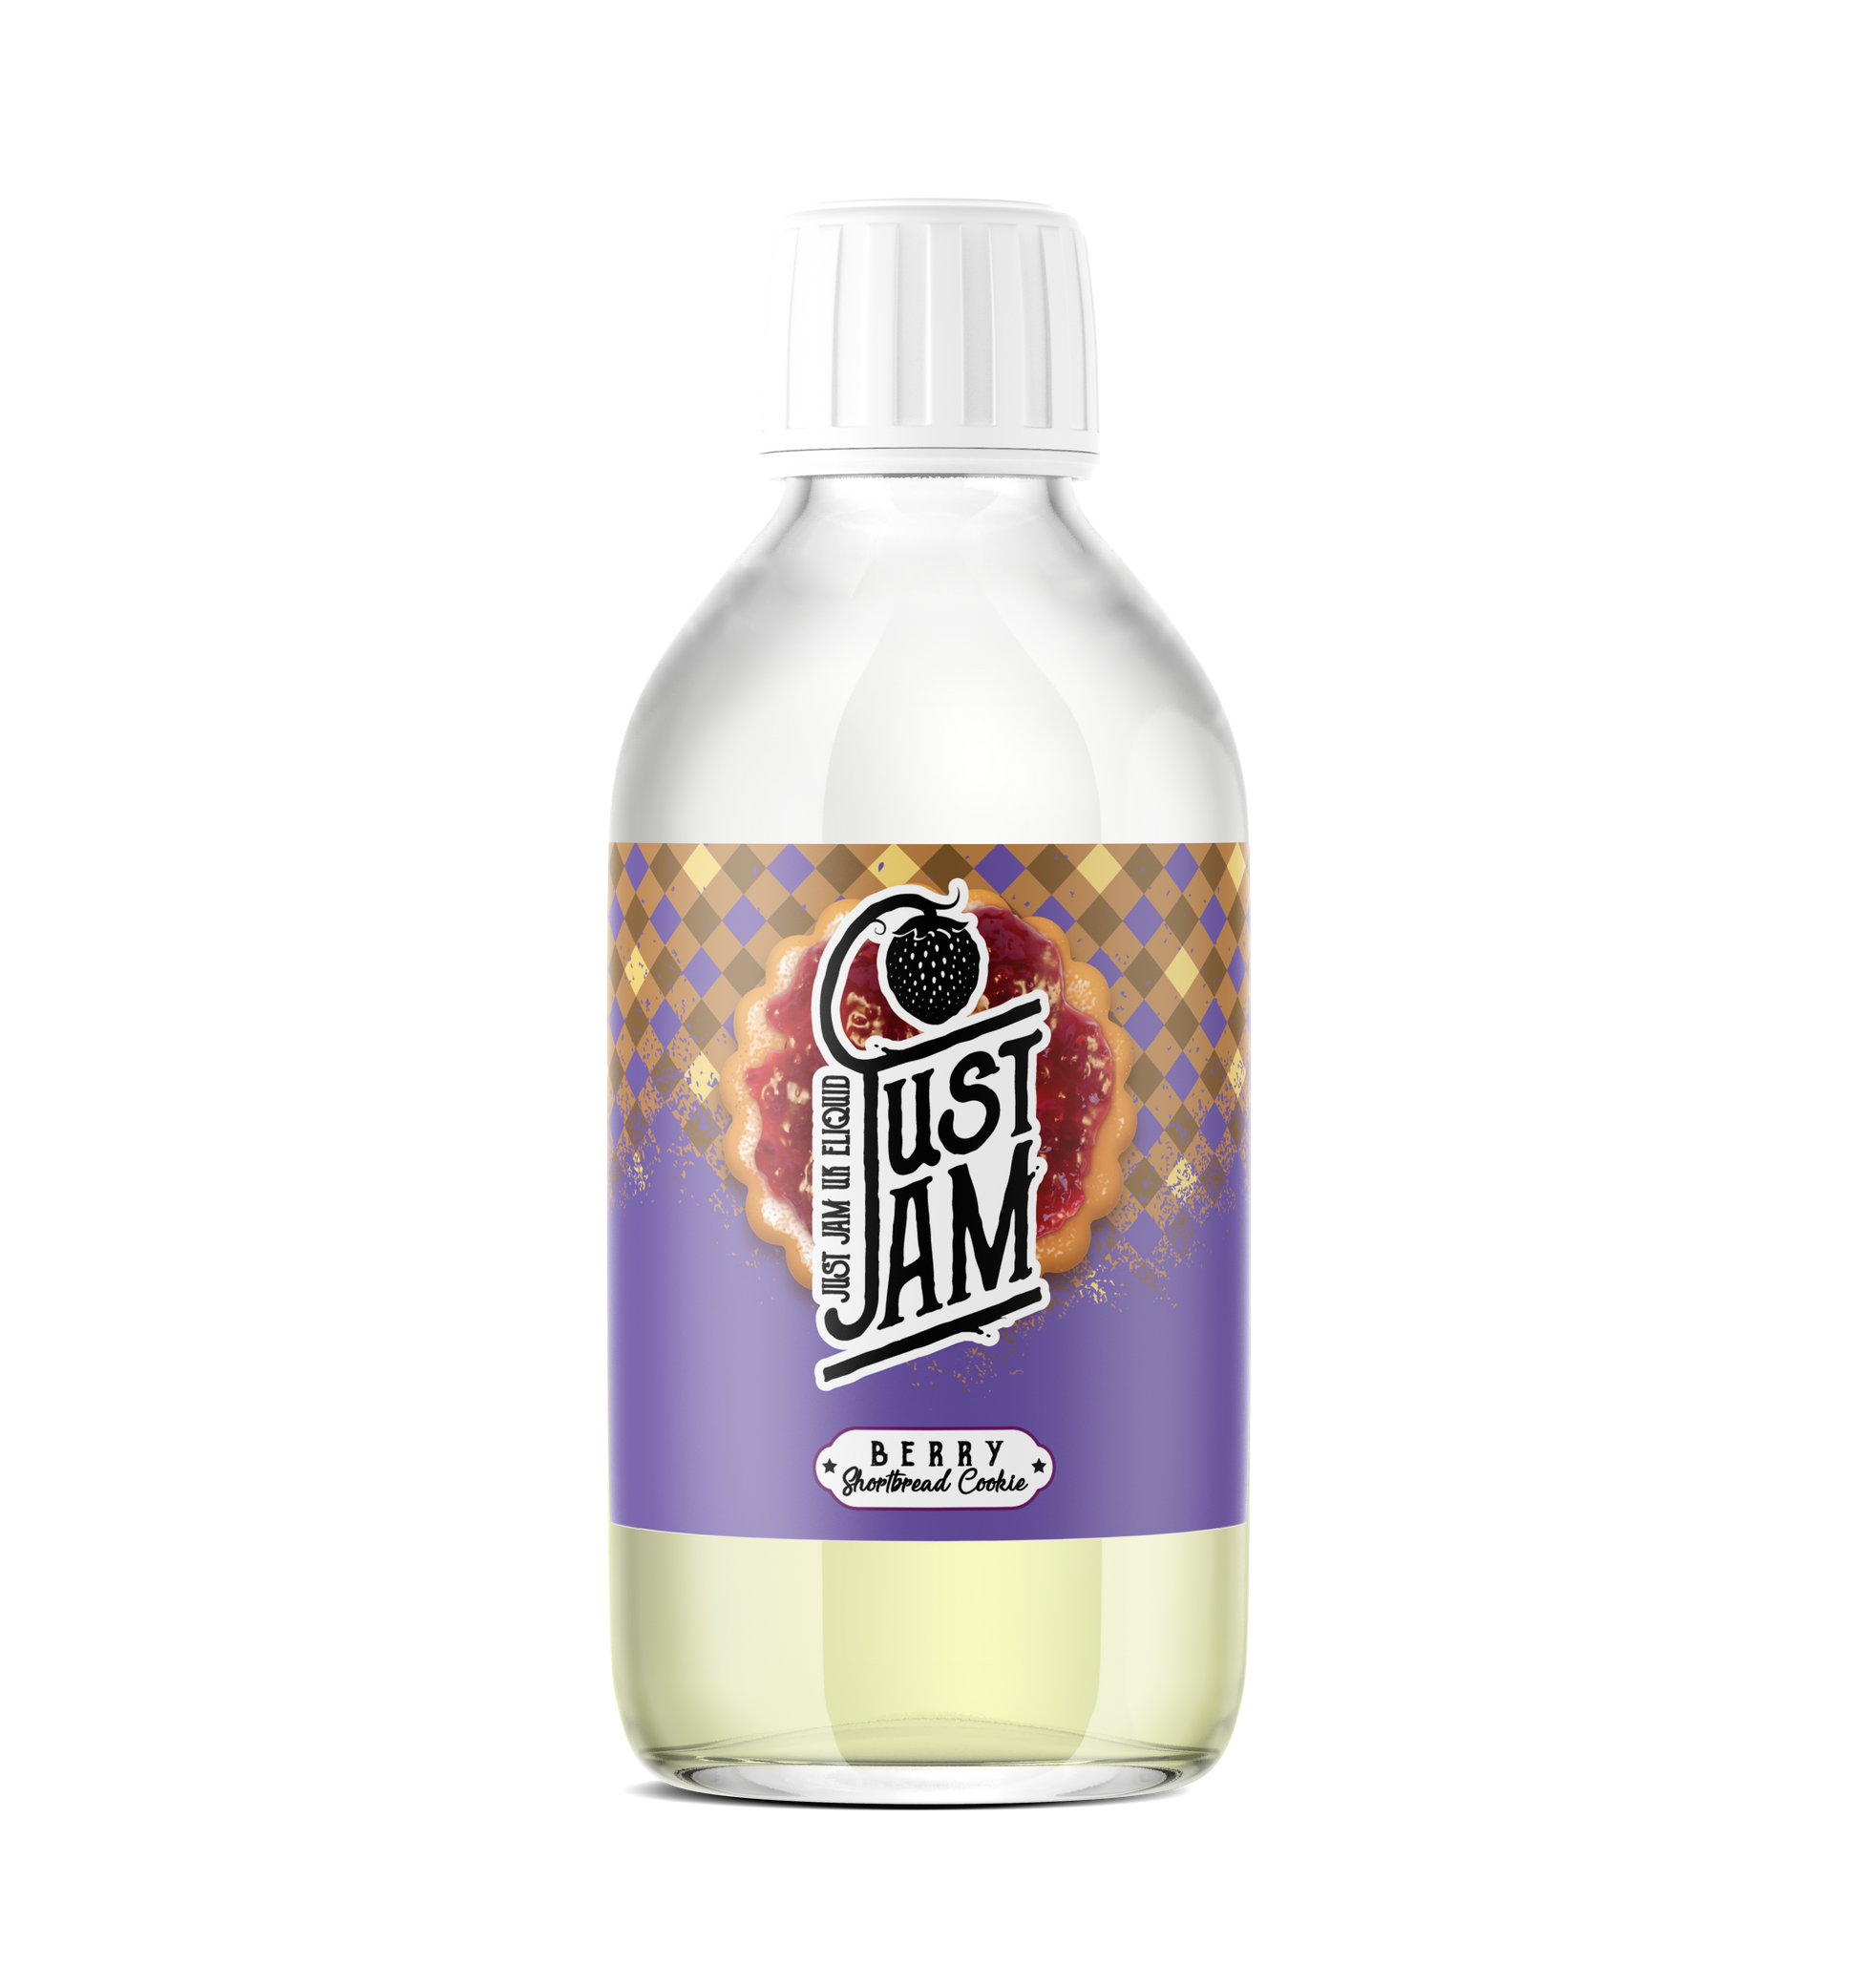 Just Jam - Berry Shortbread Cookie 200ml - The Ace Of Vapez